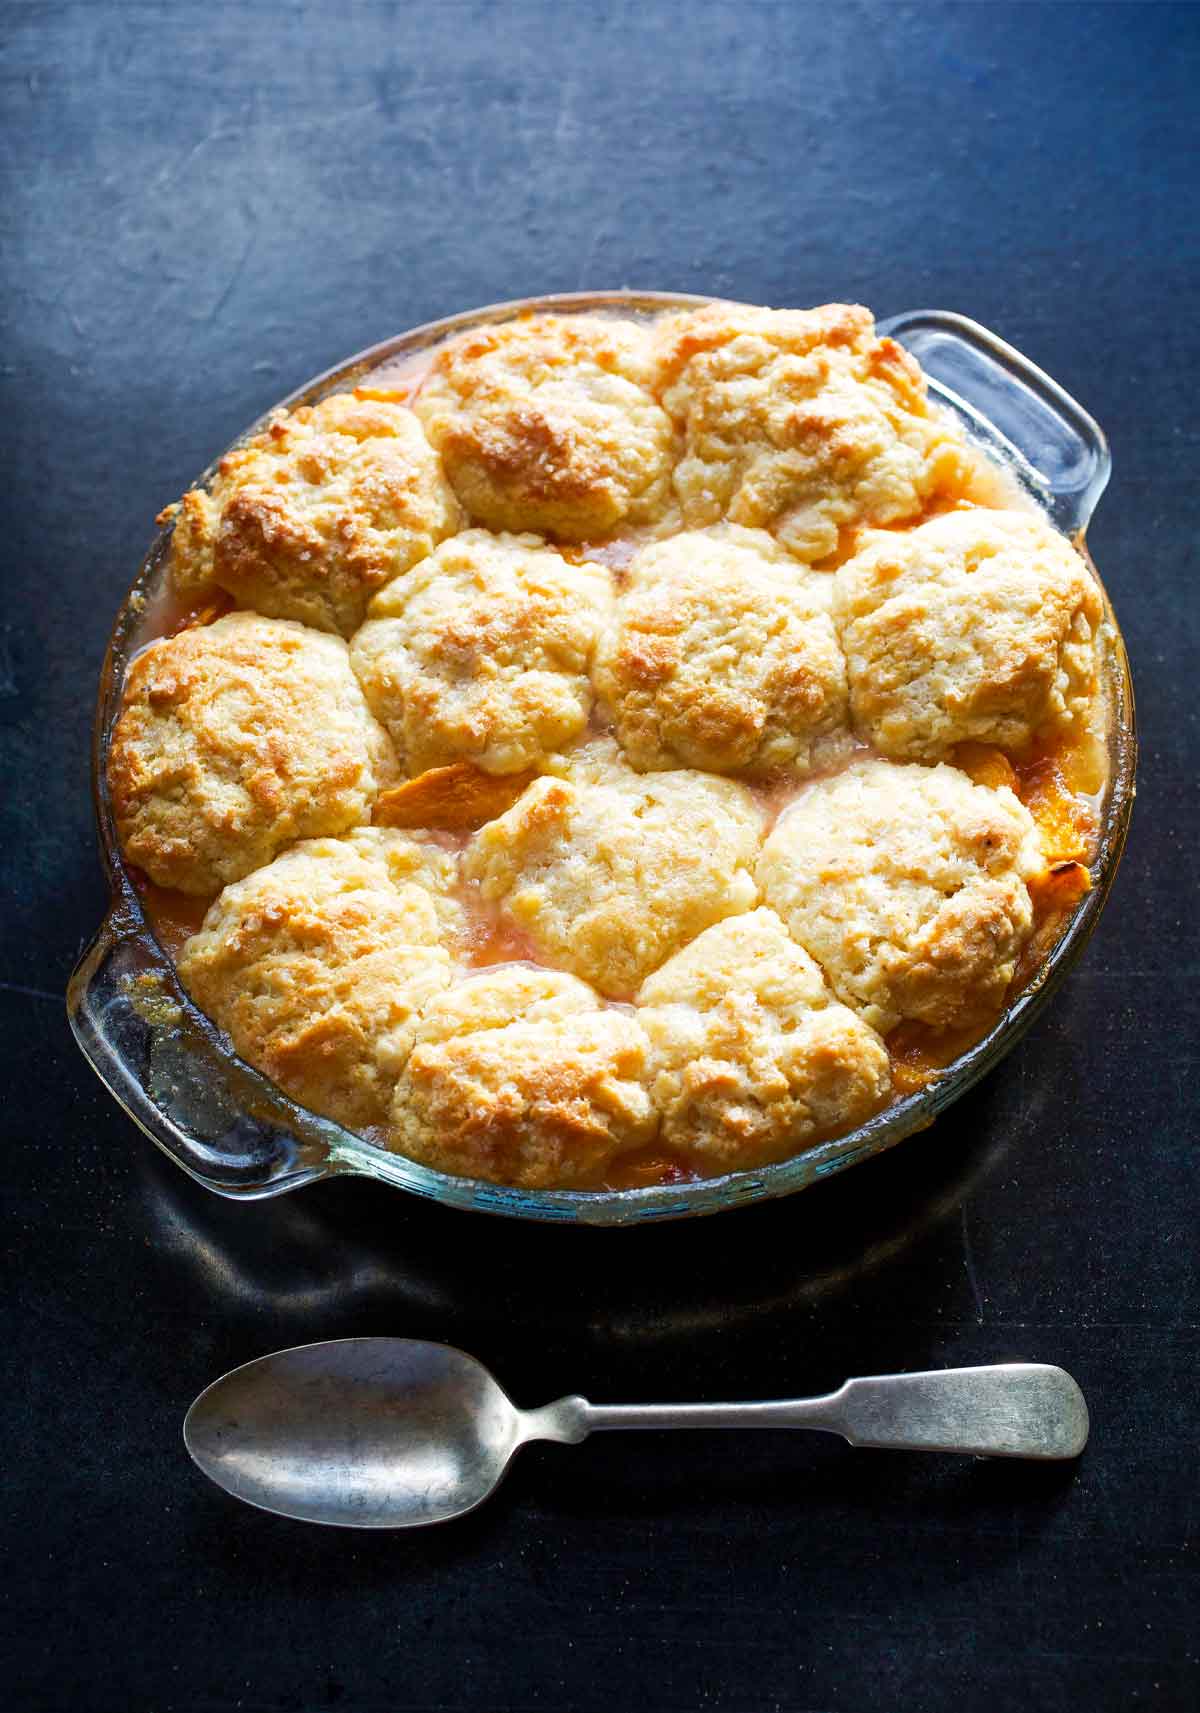 A round glass baking dish filled with peach nectarine cobbler and a spoon on the side.